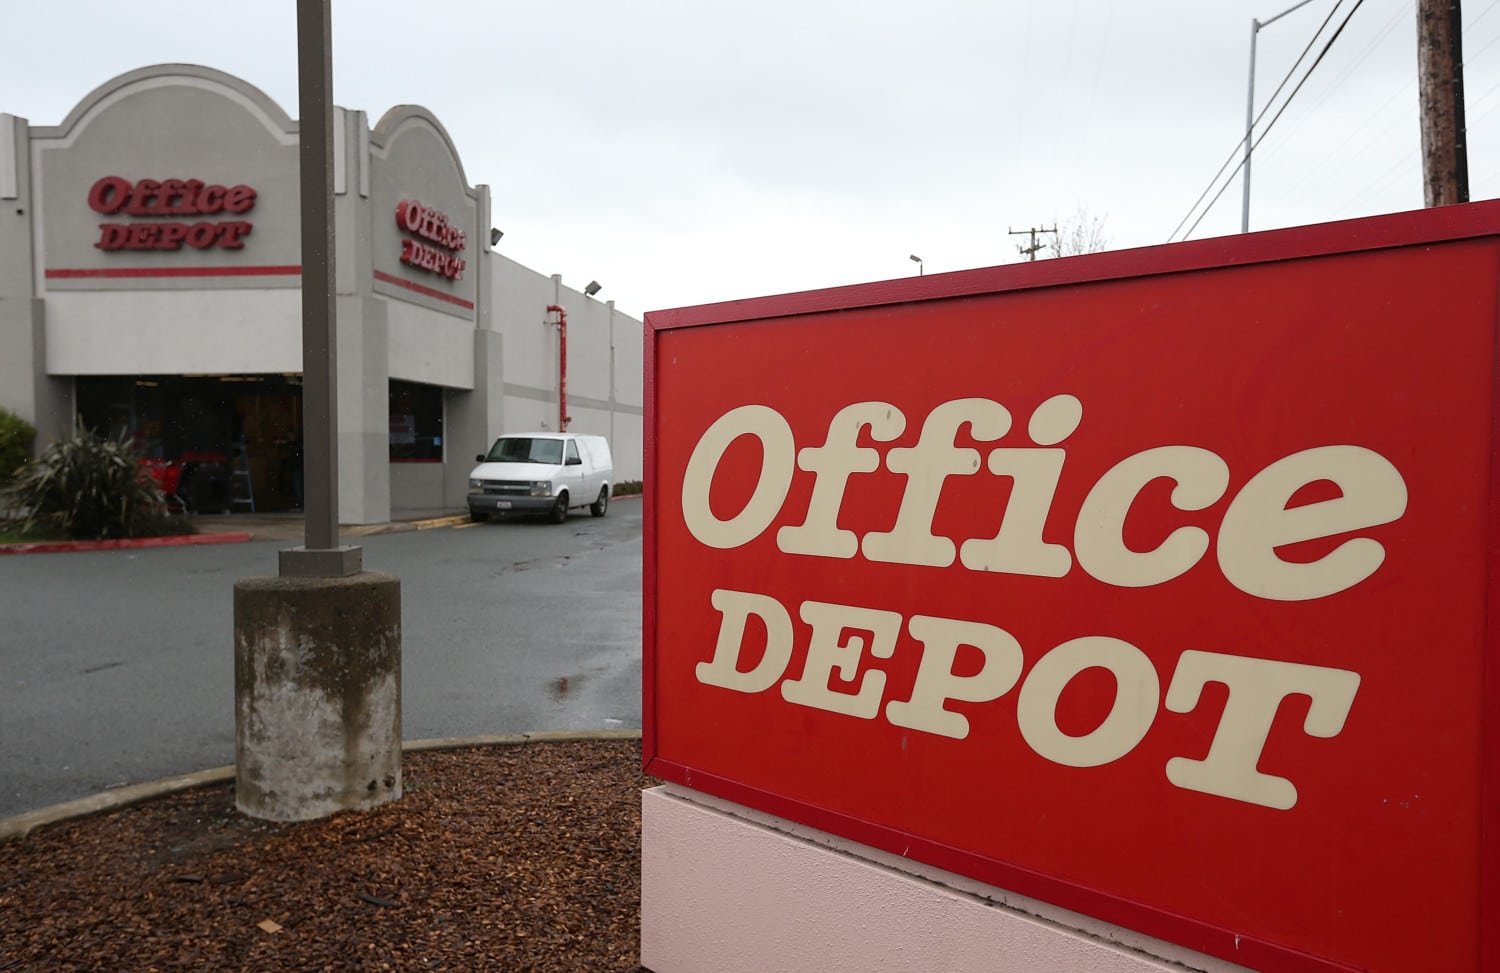 Office Max And Office Depot Said To Hold Merger Talks